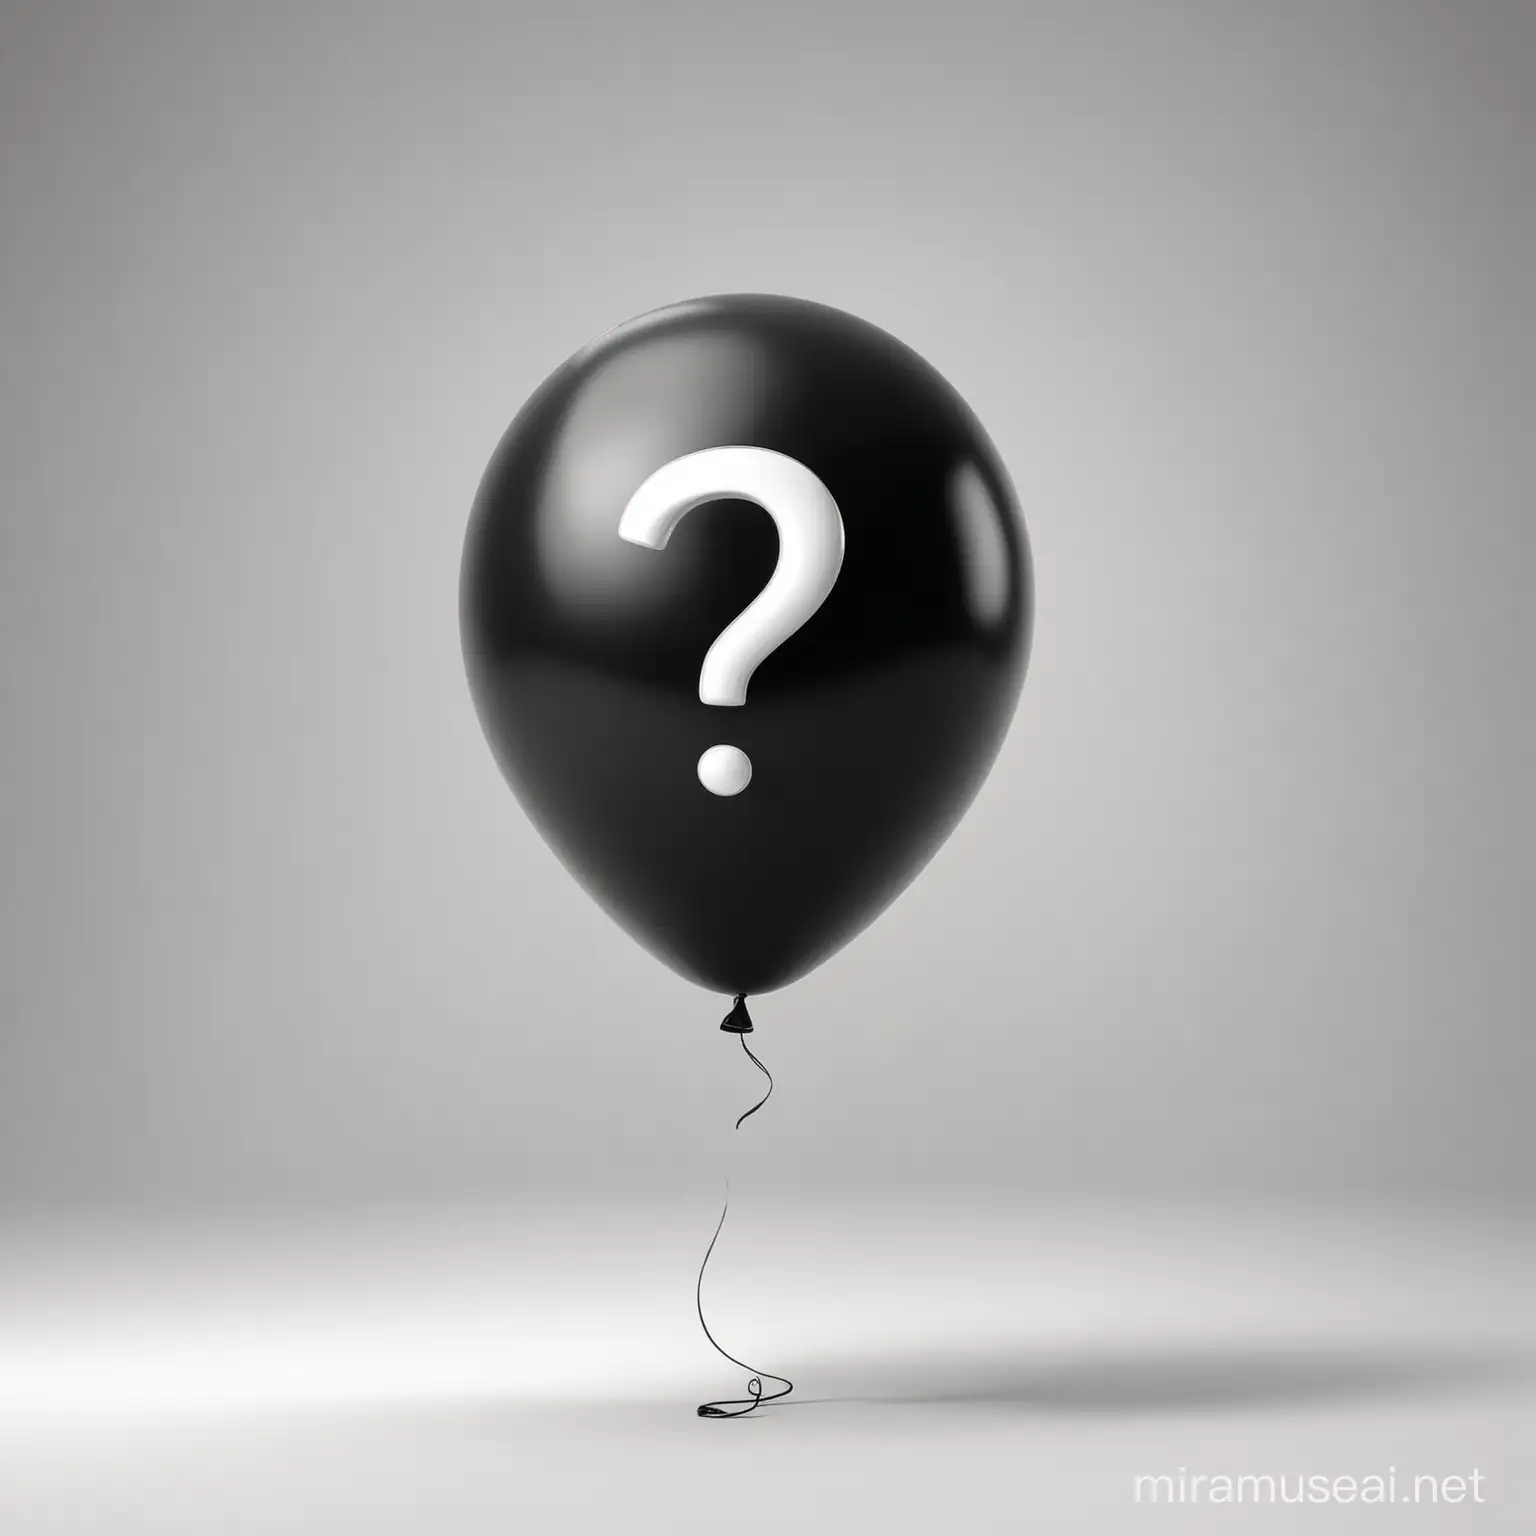 Curious Black Balloon with Question Mark in Pixar 3D Style